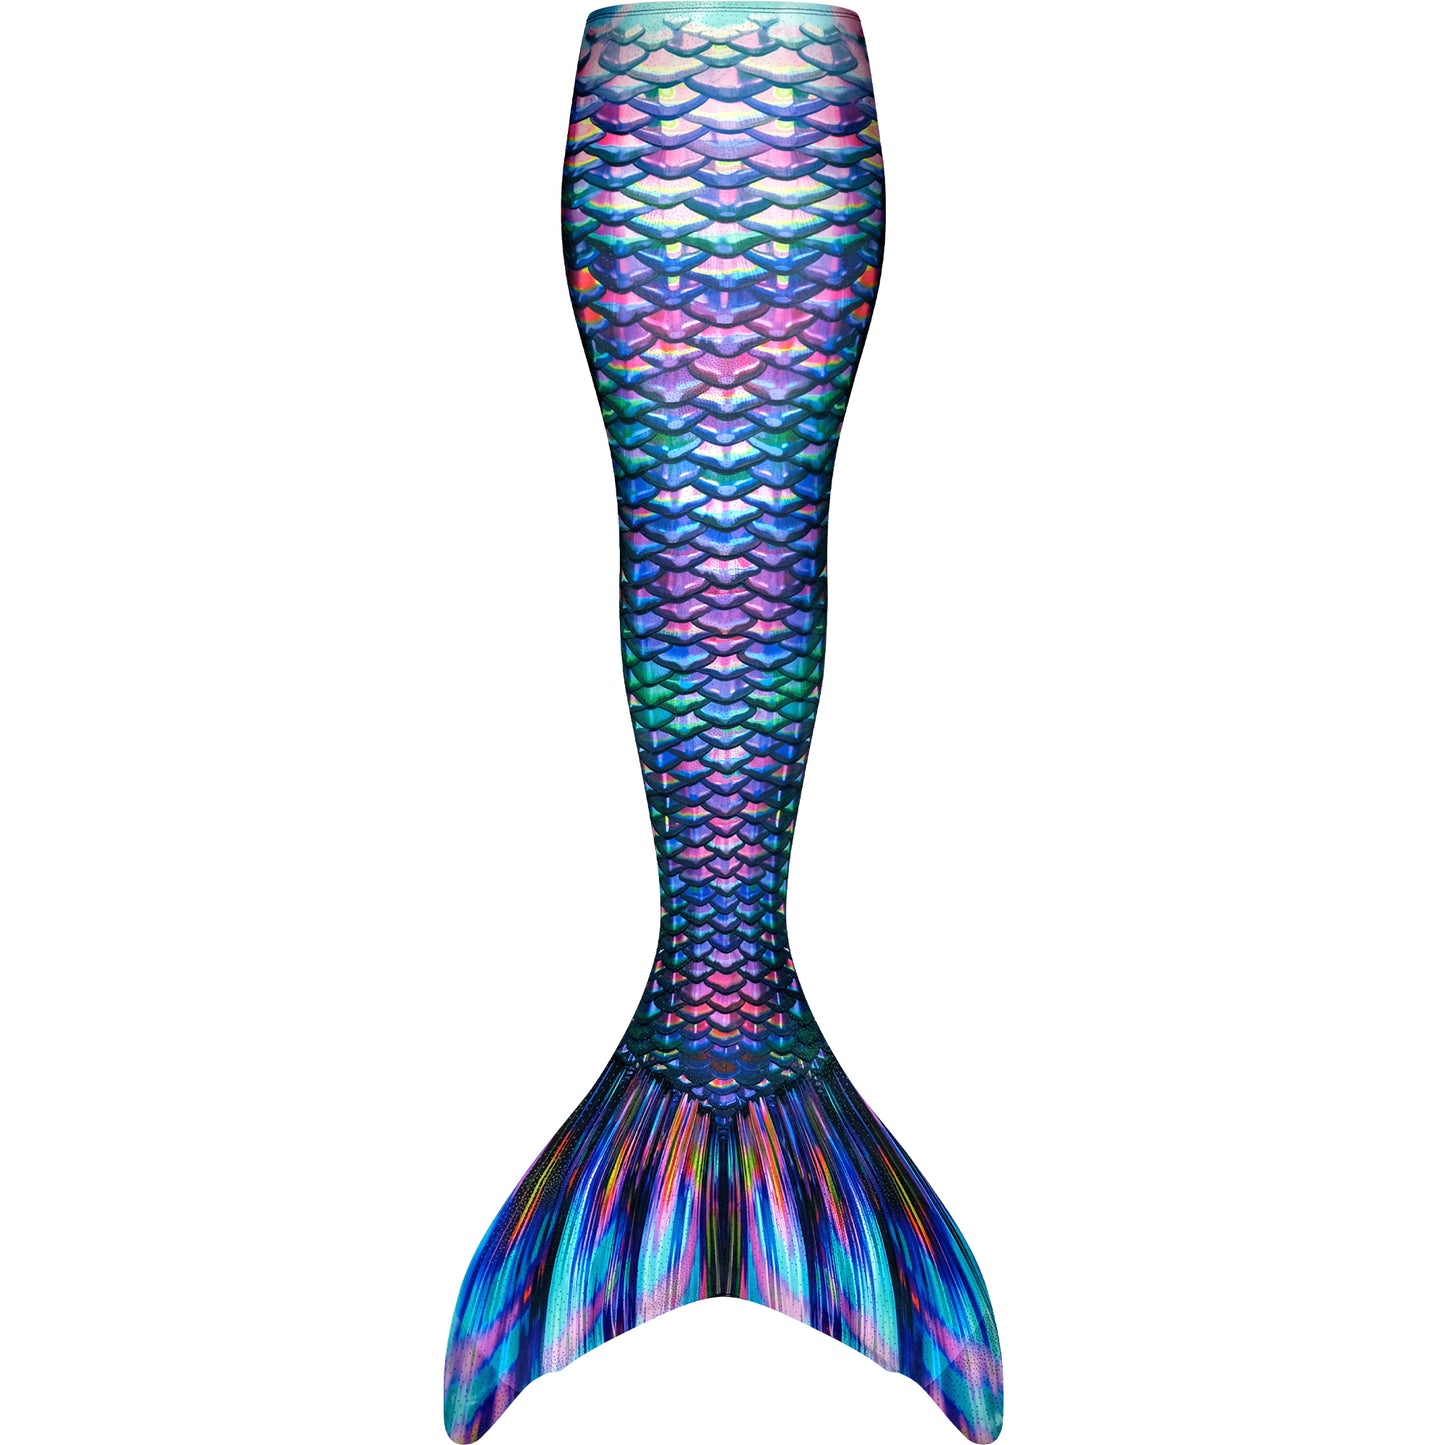 Astral Storm Mermaid Tail